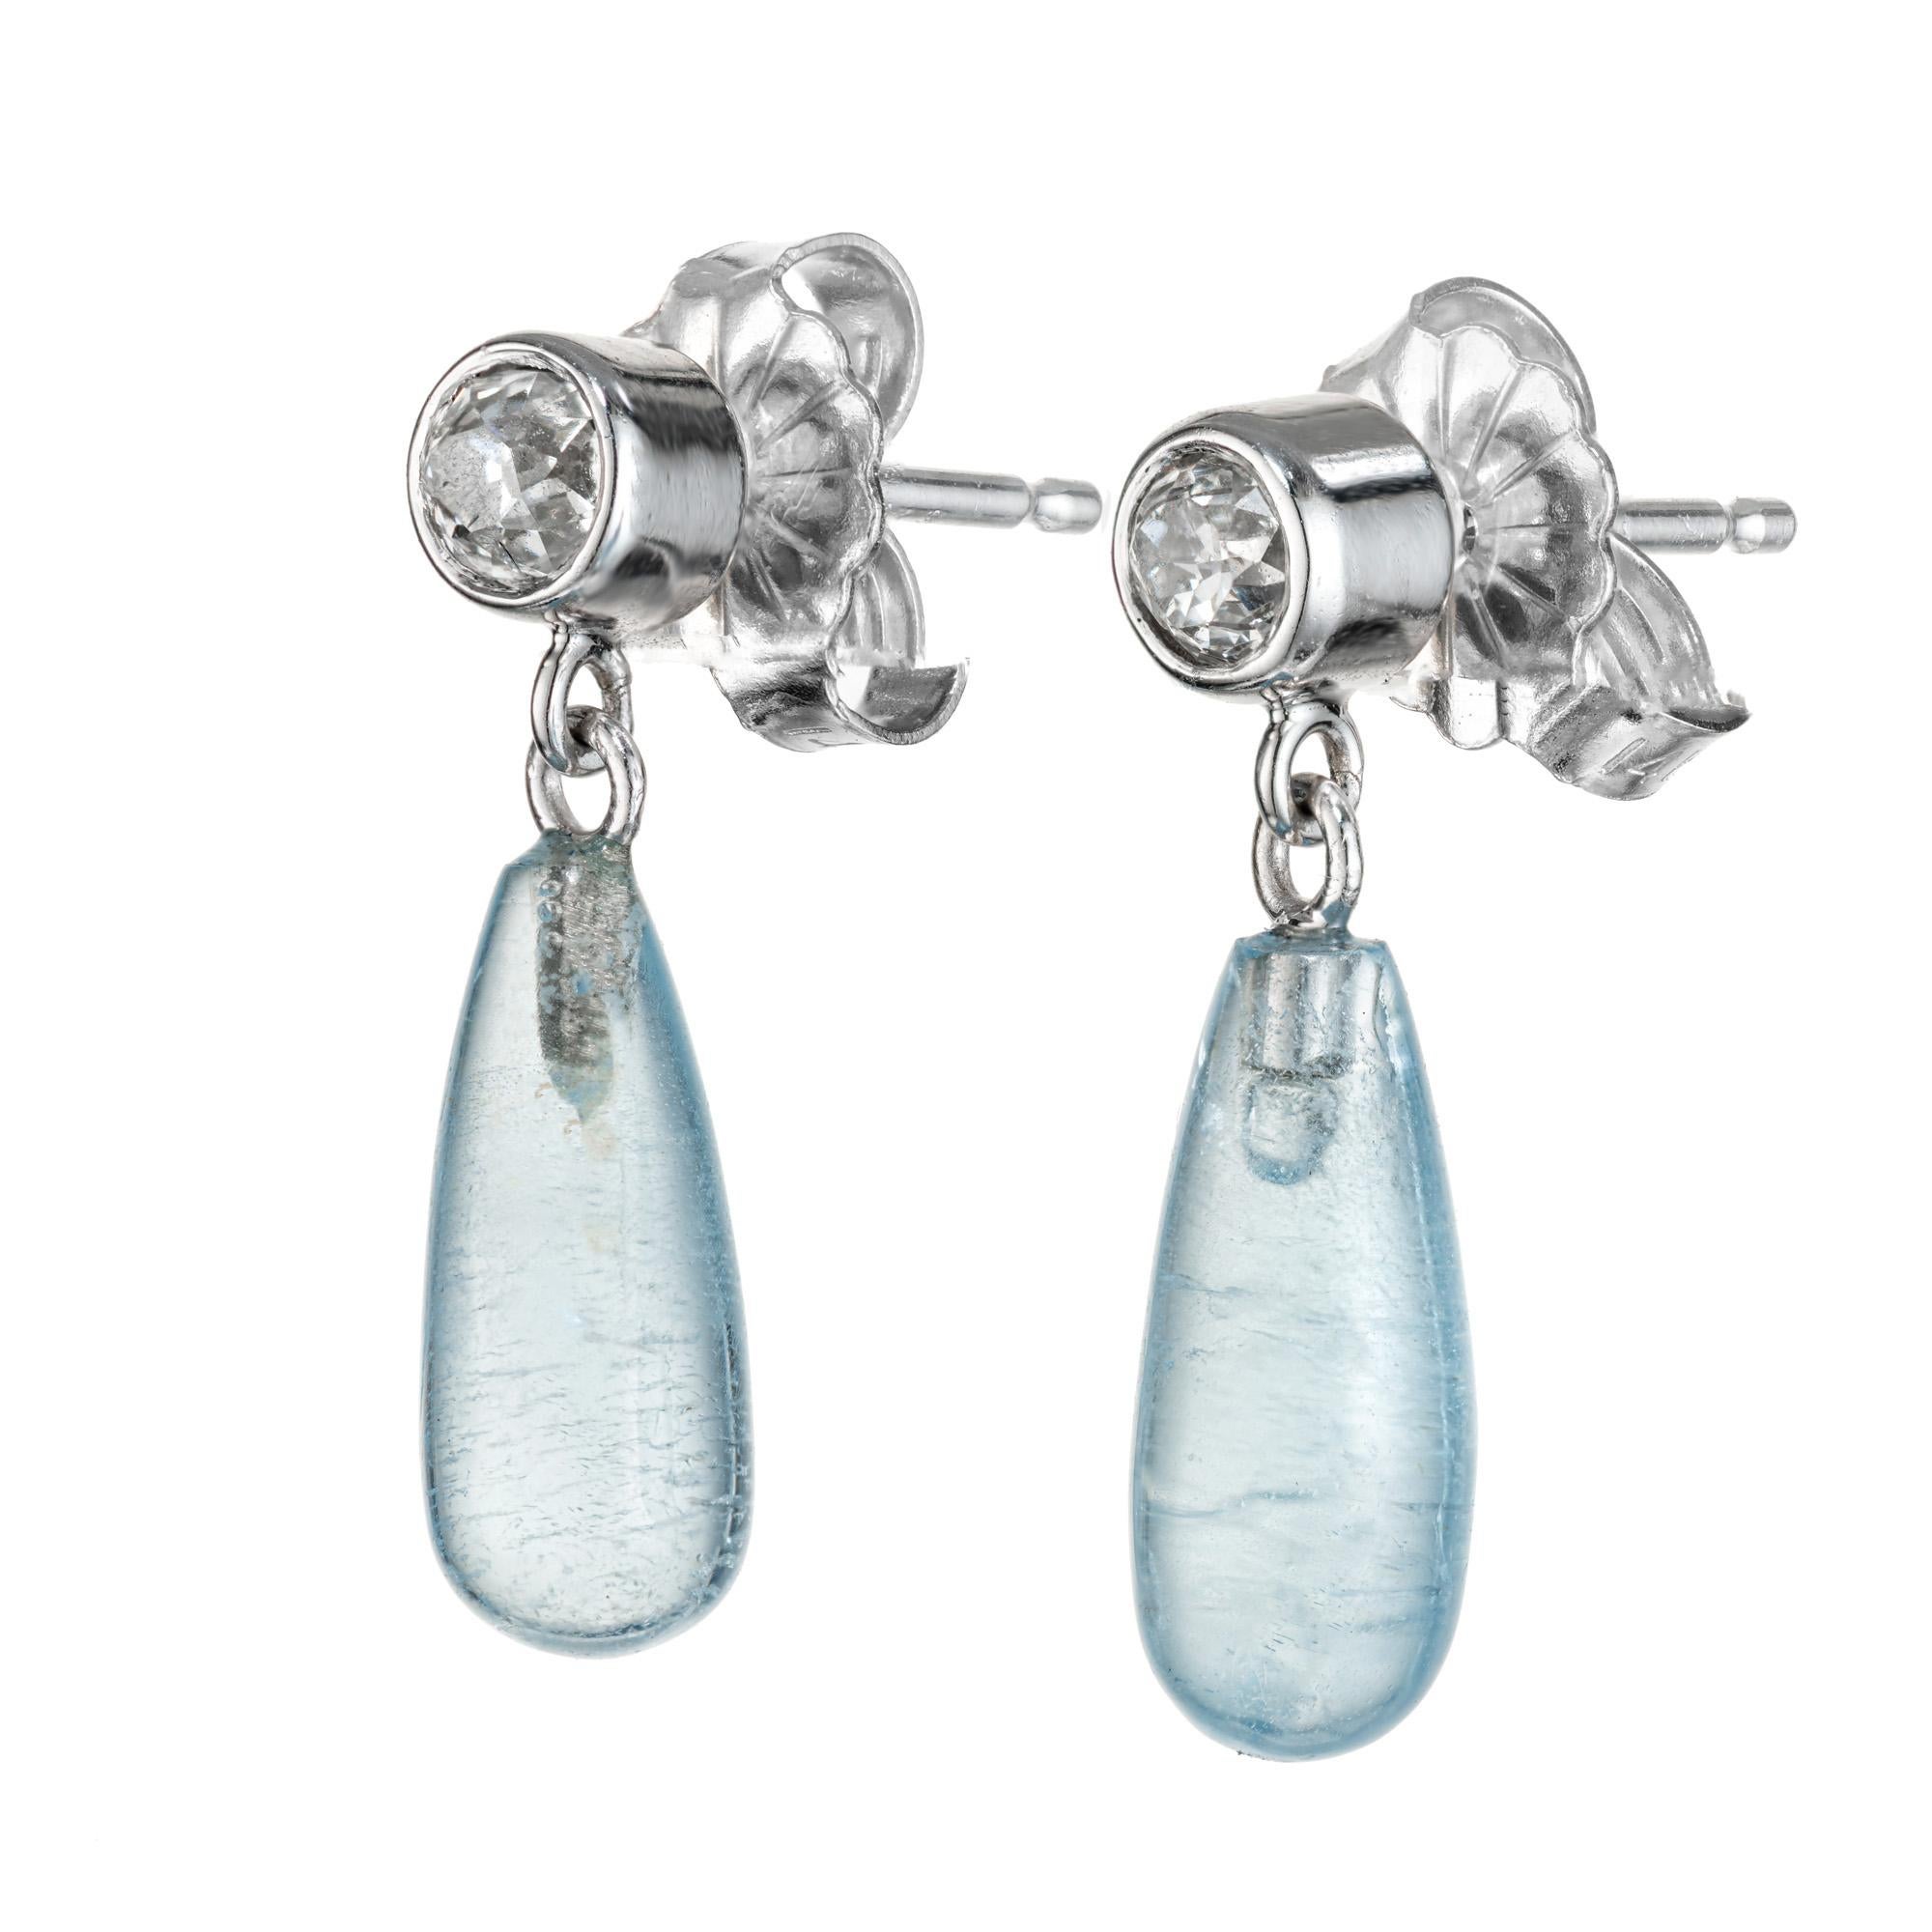 Natural untreated aqua cylinder dangle and diamond earrings. 2 tapered cylinder cut Aquamarine dangles with 2 old mine cut bezel set diamond tops. 14k white gold. Designed and crafted in the Peter Suchy workshop

2 tapered cylinder cut blue aquas,